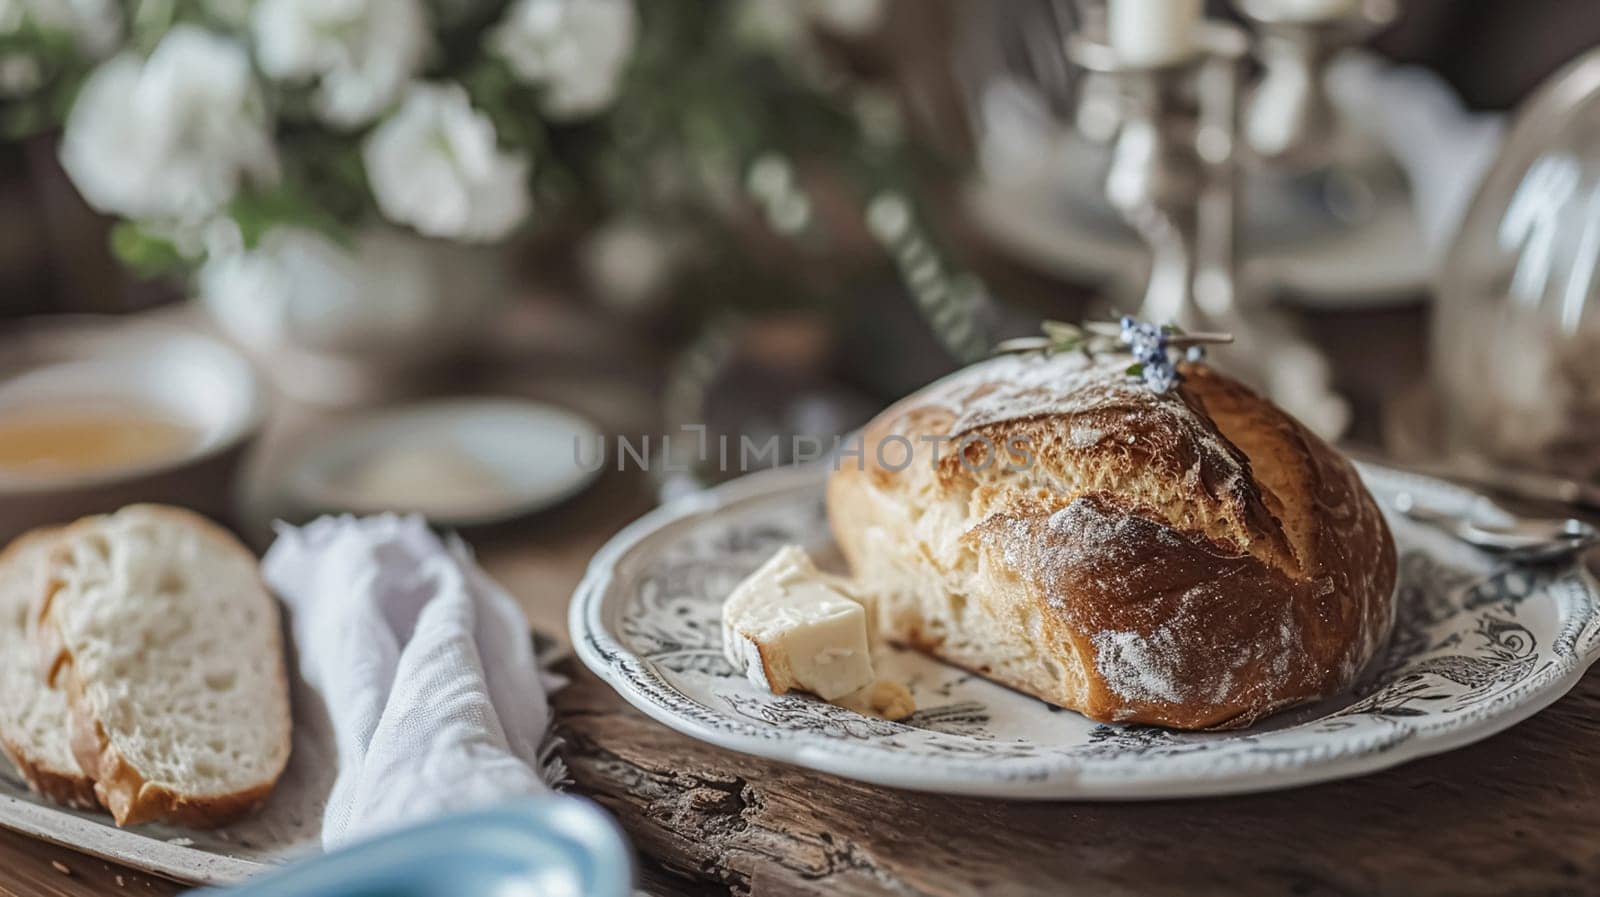 Bread and butter, homemade baking and traditional food, country life by Anneleven